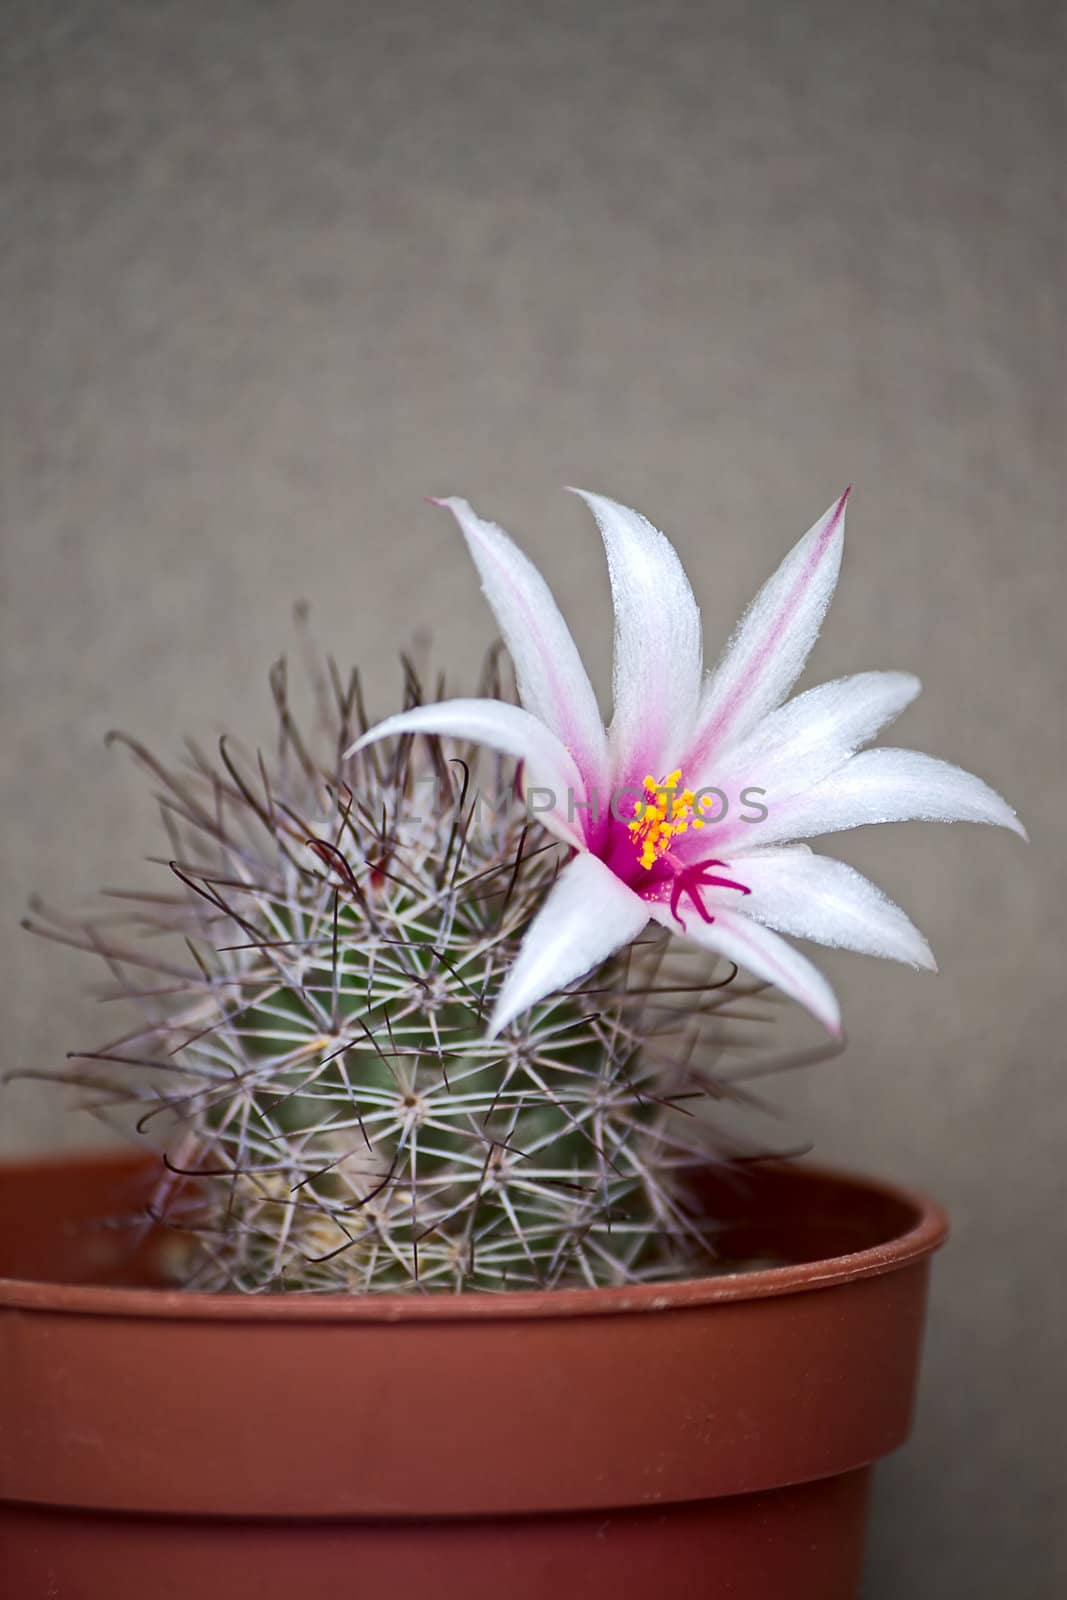 Cactus with blossoms on light background (Mammillaria).Image with shallow depth of field.